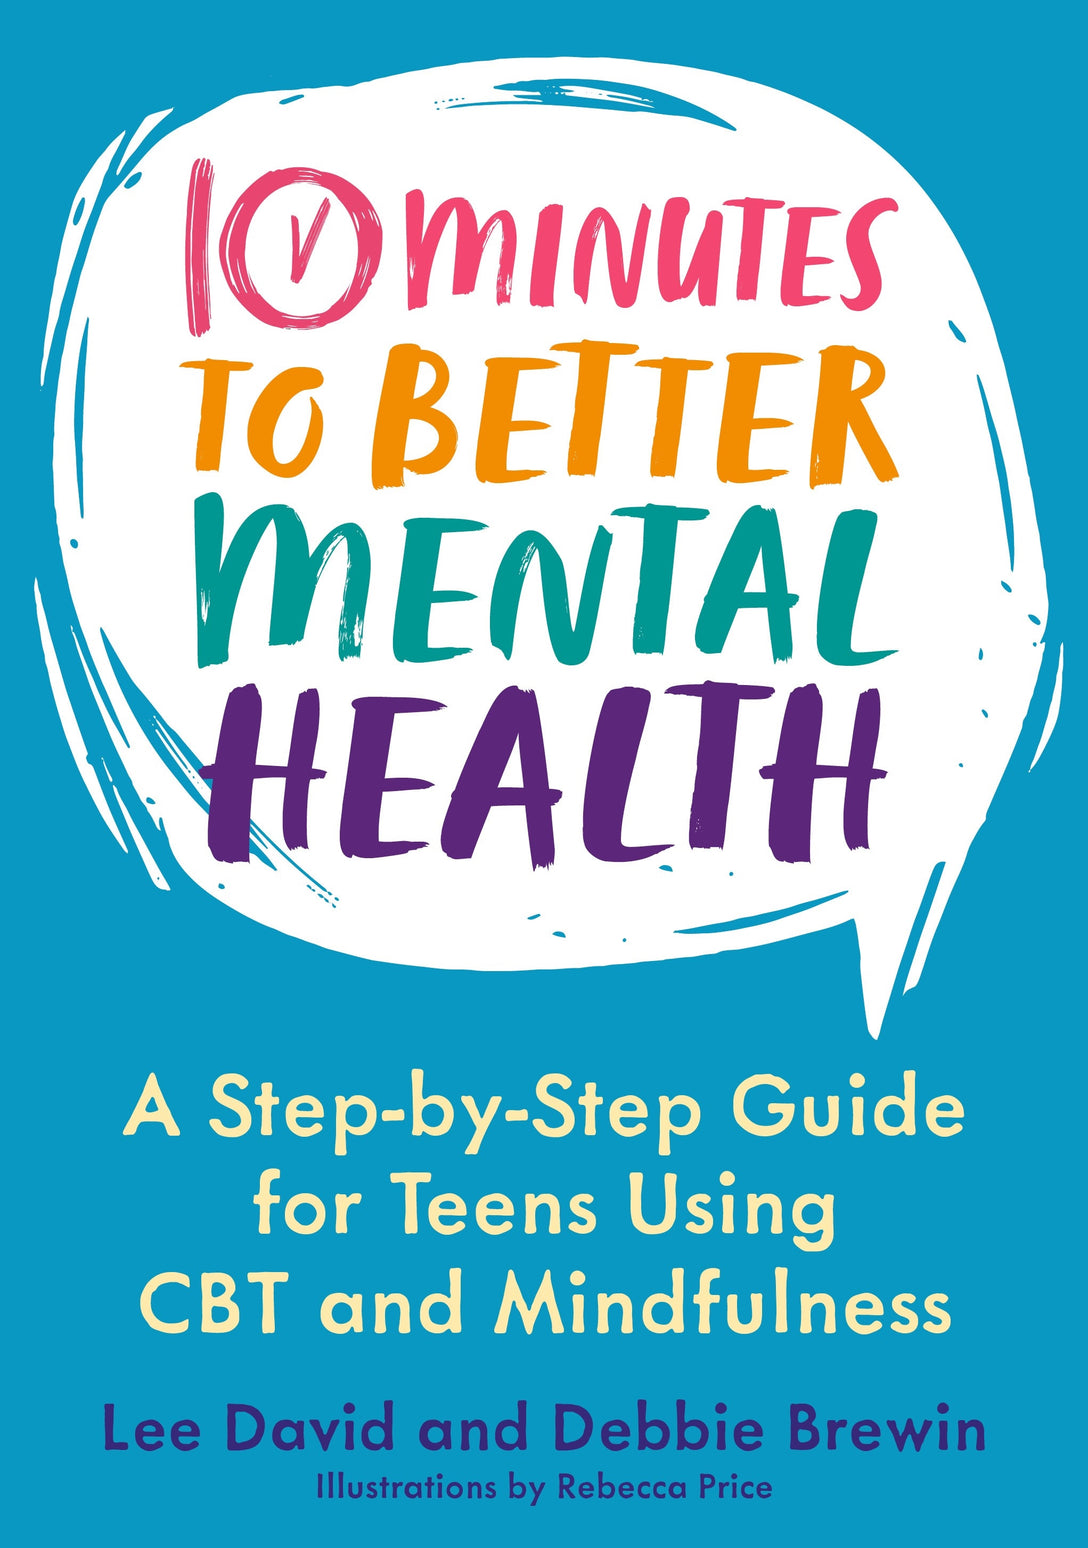 10 Minutes to Better Mental Health by Lee David, Debbie Brewin, Rebecca Price